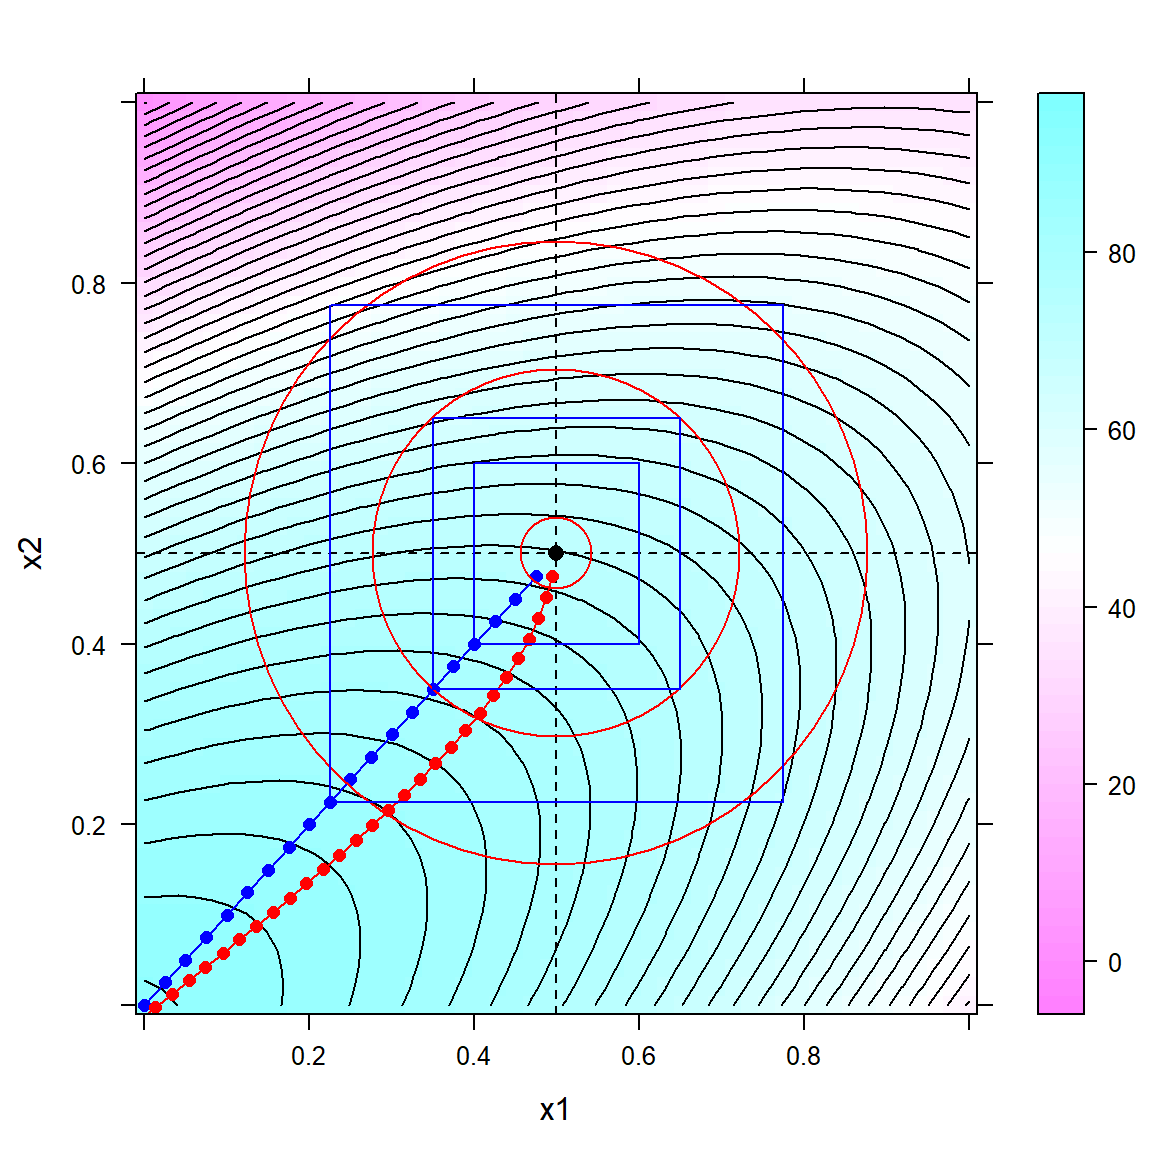 Hyperspherical (red) and hypercubical (blue) relaxation traces on an ascending ridge with three hypercubical and hyperspherical constraints superimposed